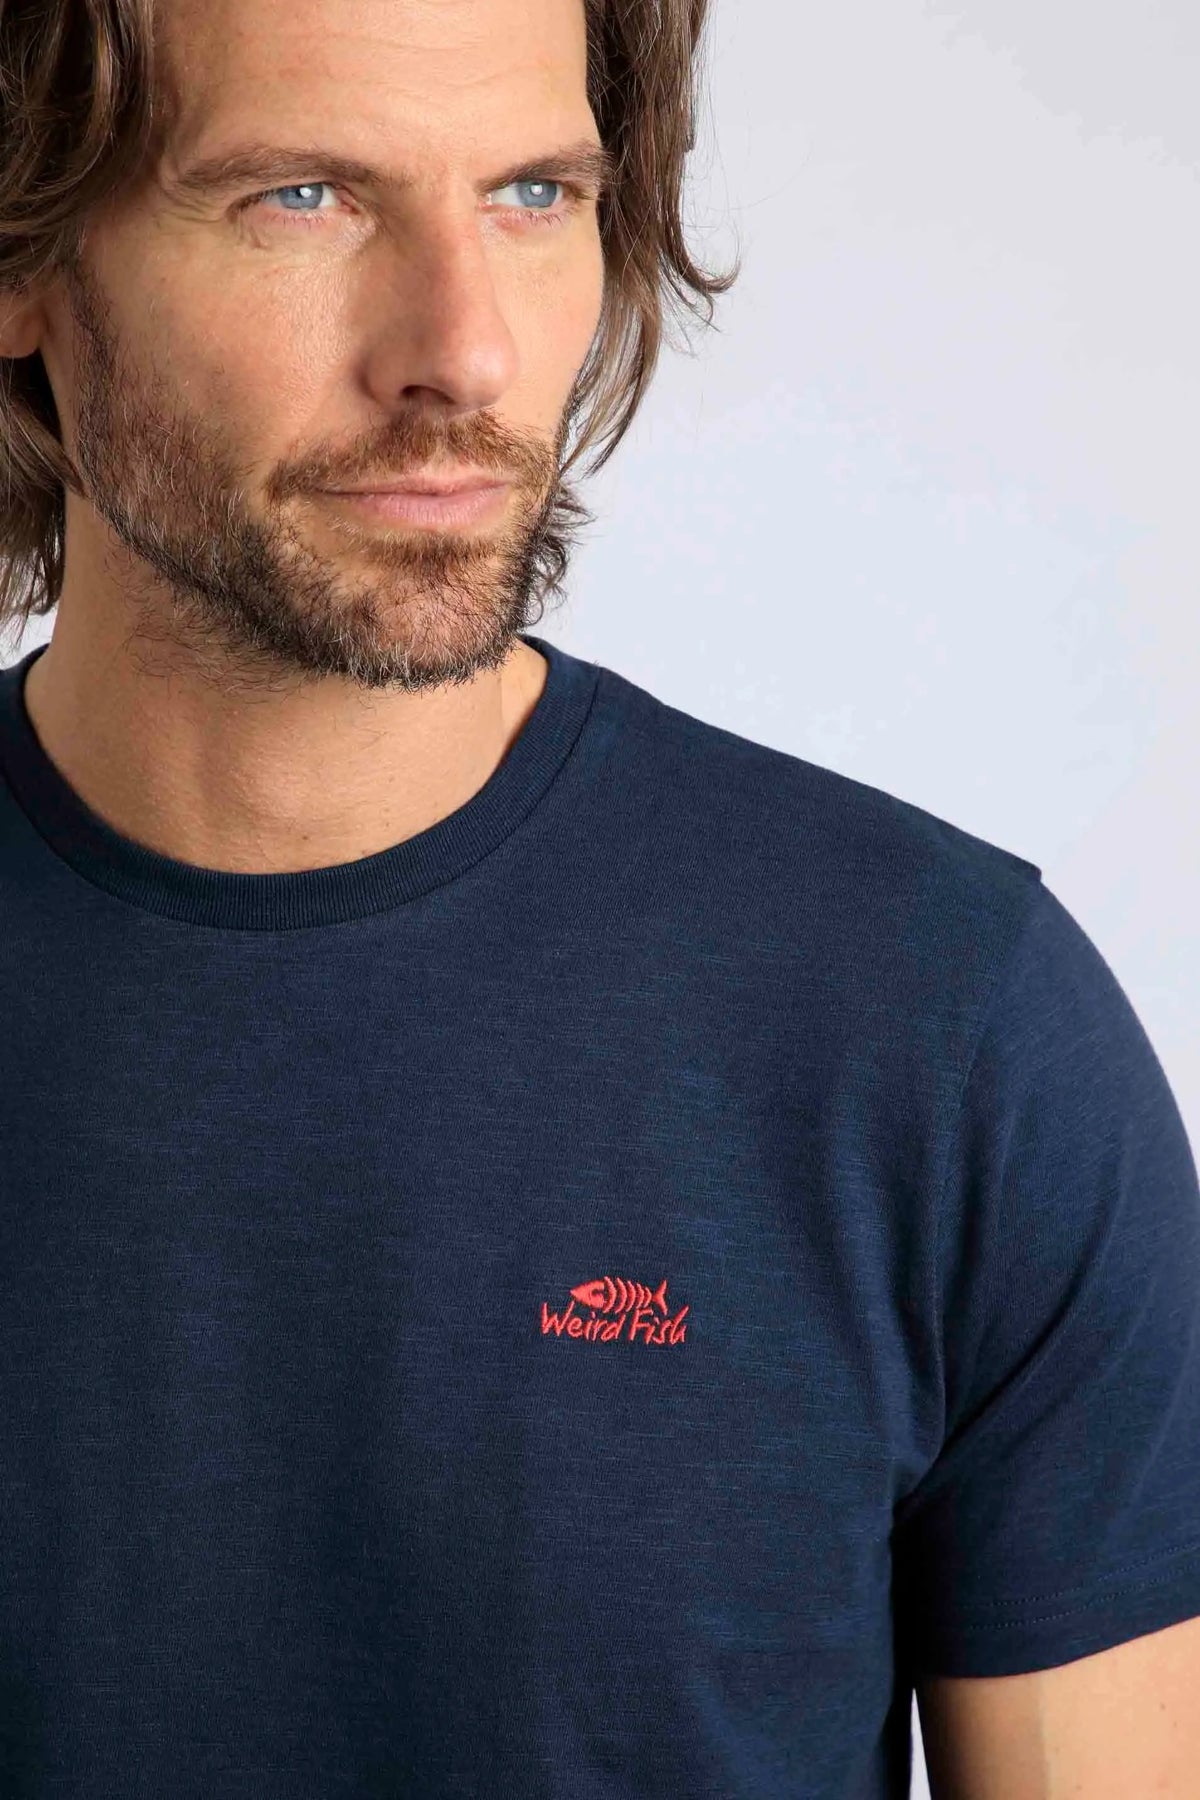 Plain men's tee from Weird Fish in Navy except for a small red logo on the chest.